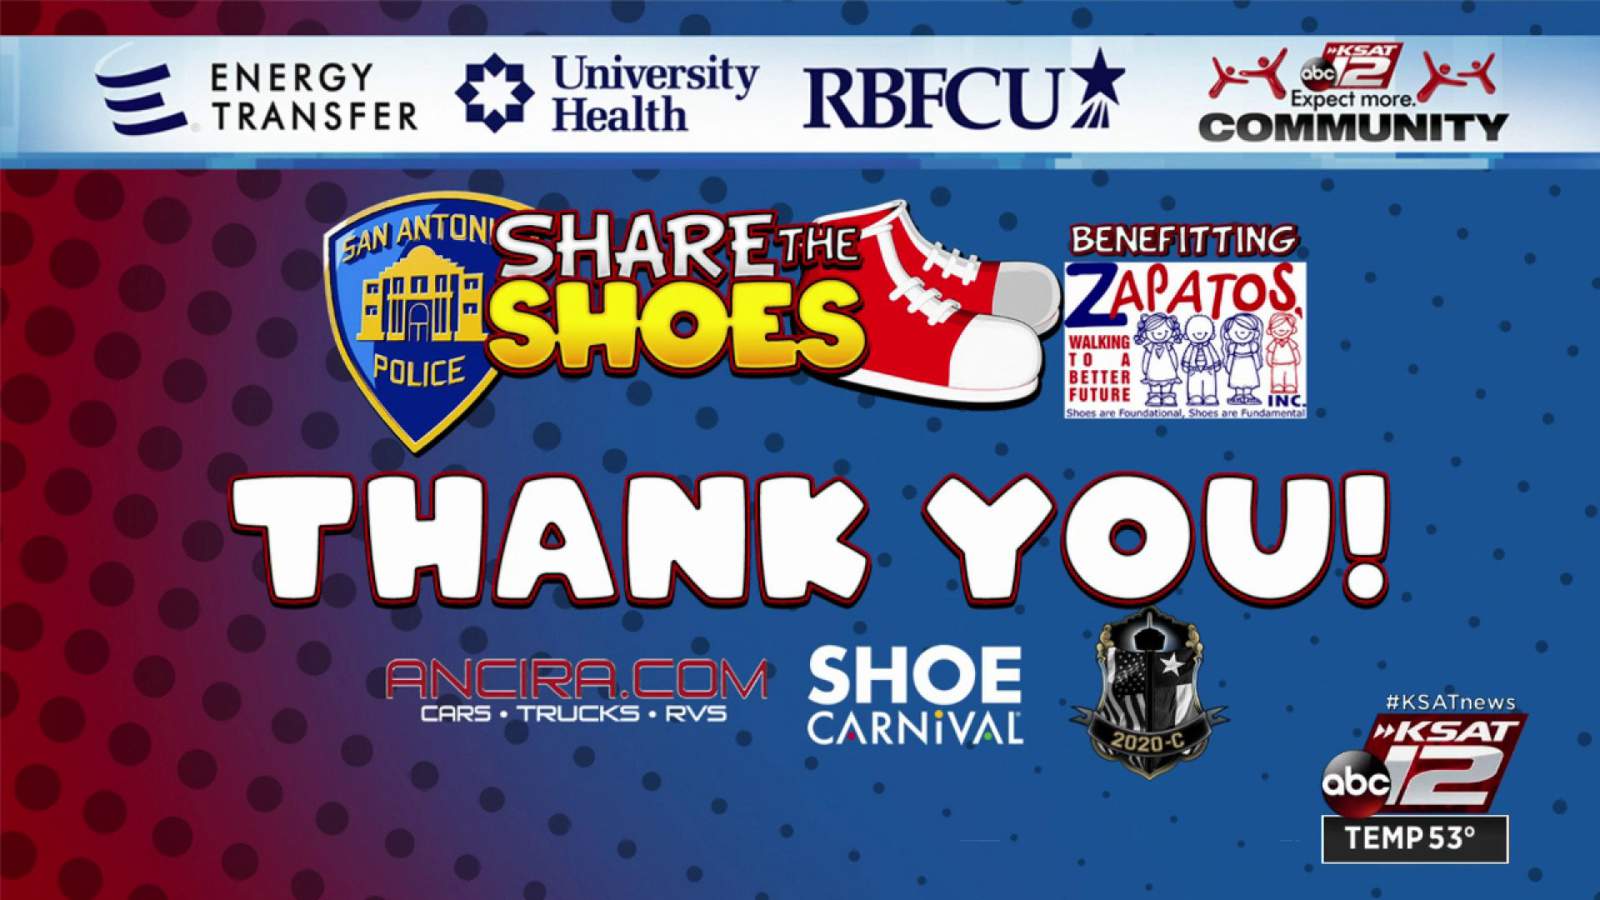 ‘Share the Shoes’ collection drive receives 2,070 shoes for Zapatos